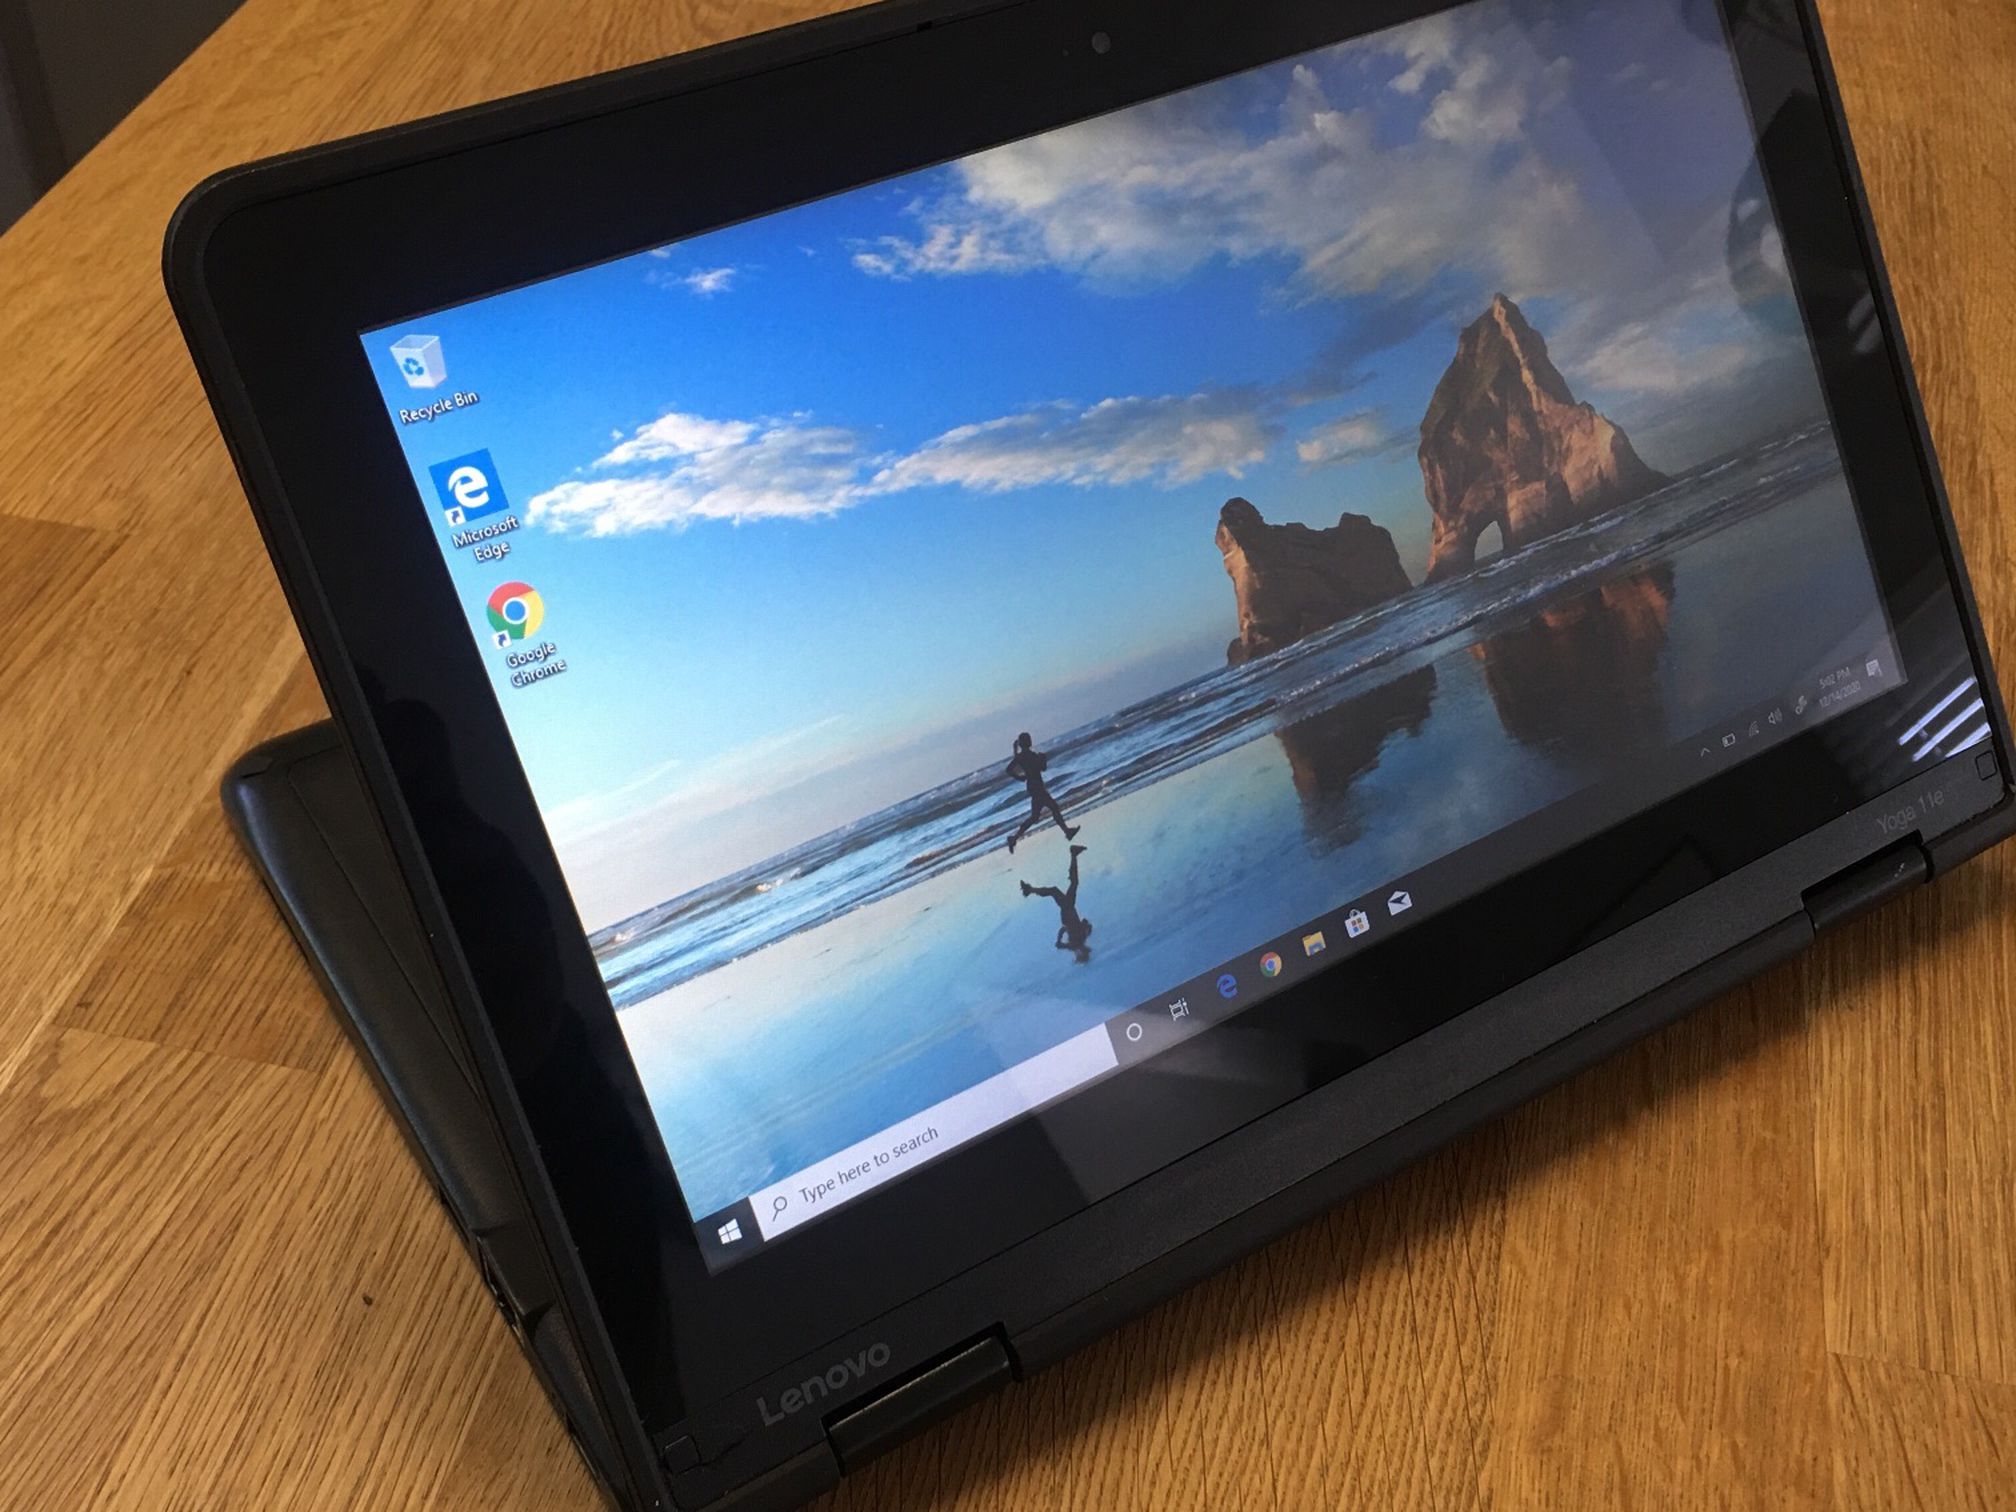 Lenovo ThinkPad Laptop - 2-in-1 Converts To A Tablet - Intel i3 / 8GB Memory / 120GB SSD Hard Drive